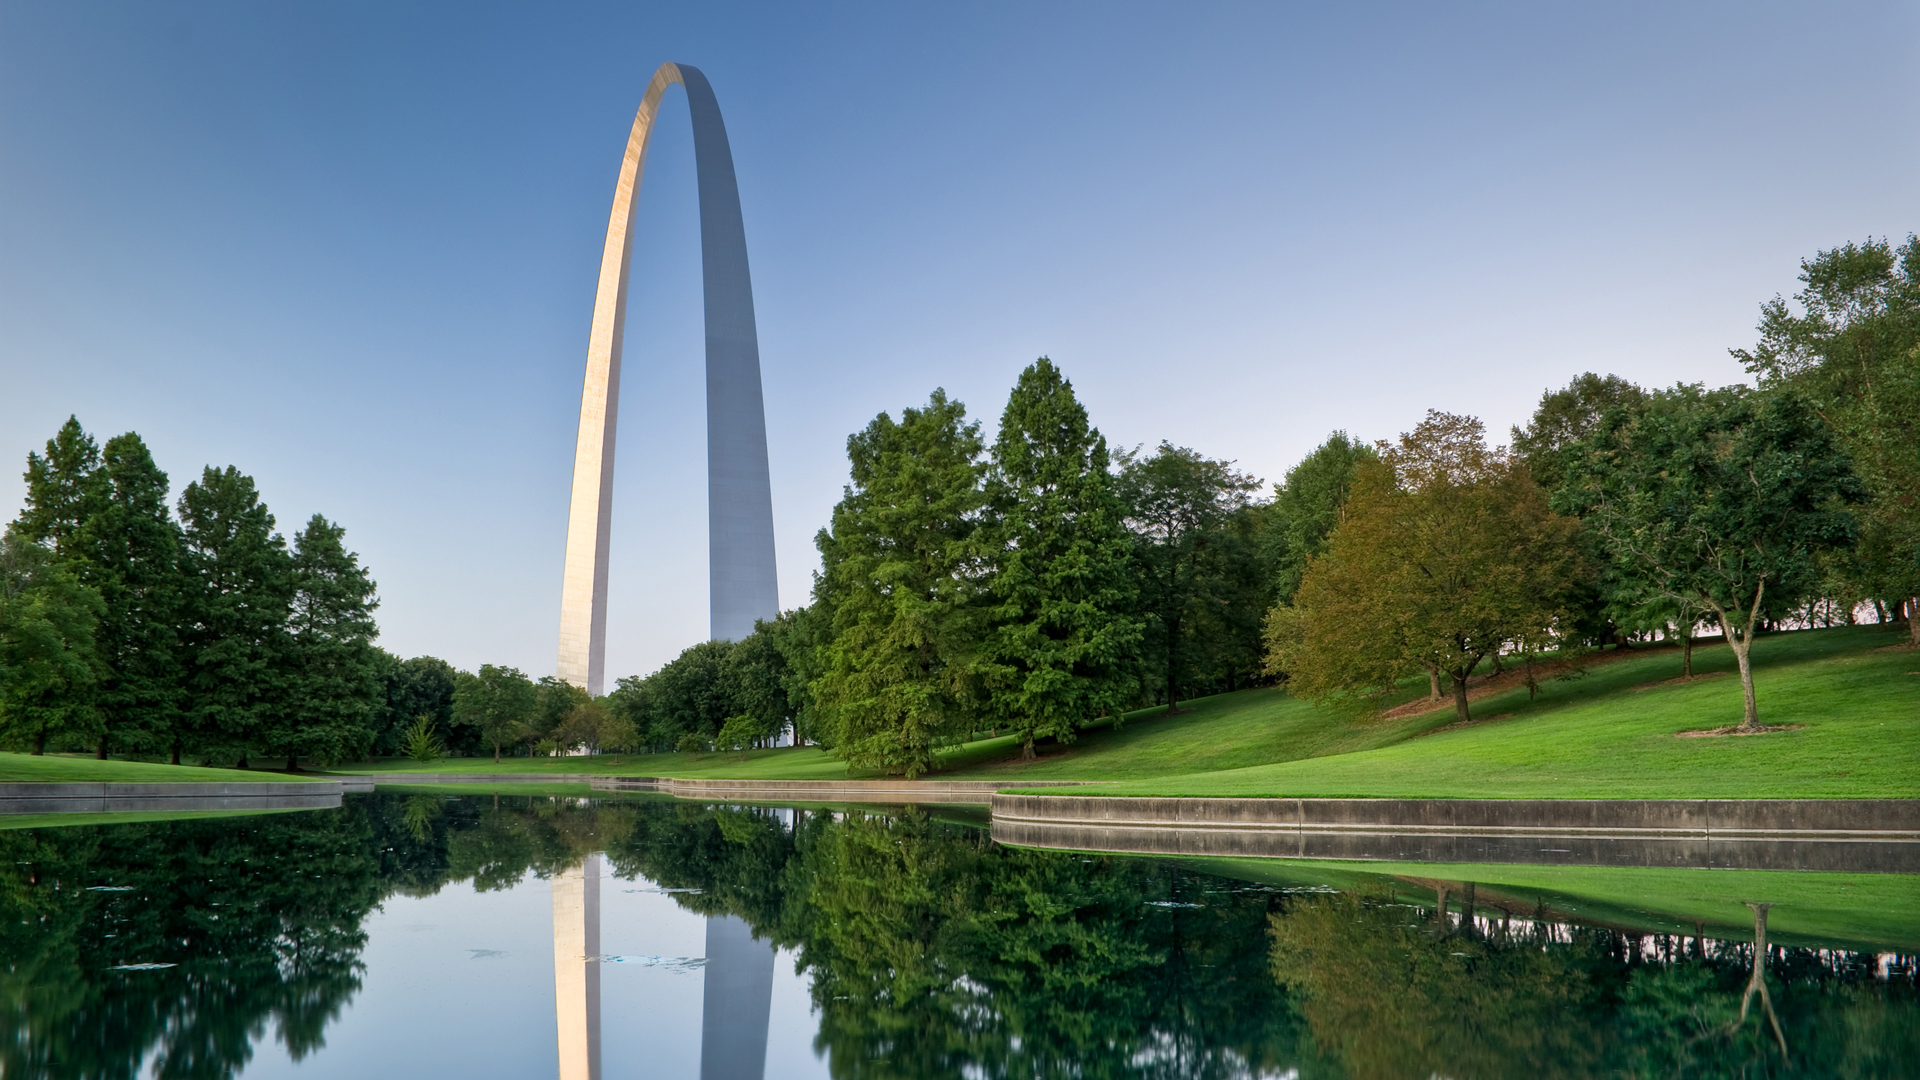 Gateway Arch in St. Louis, a 630-foot monument.